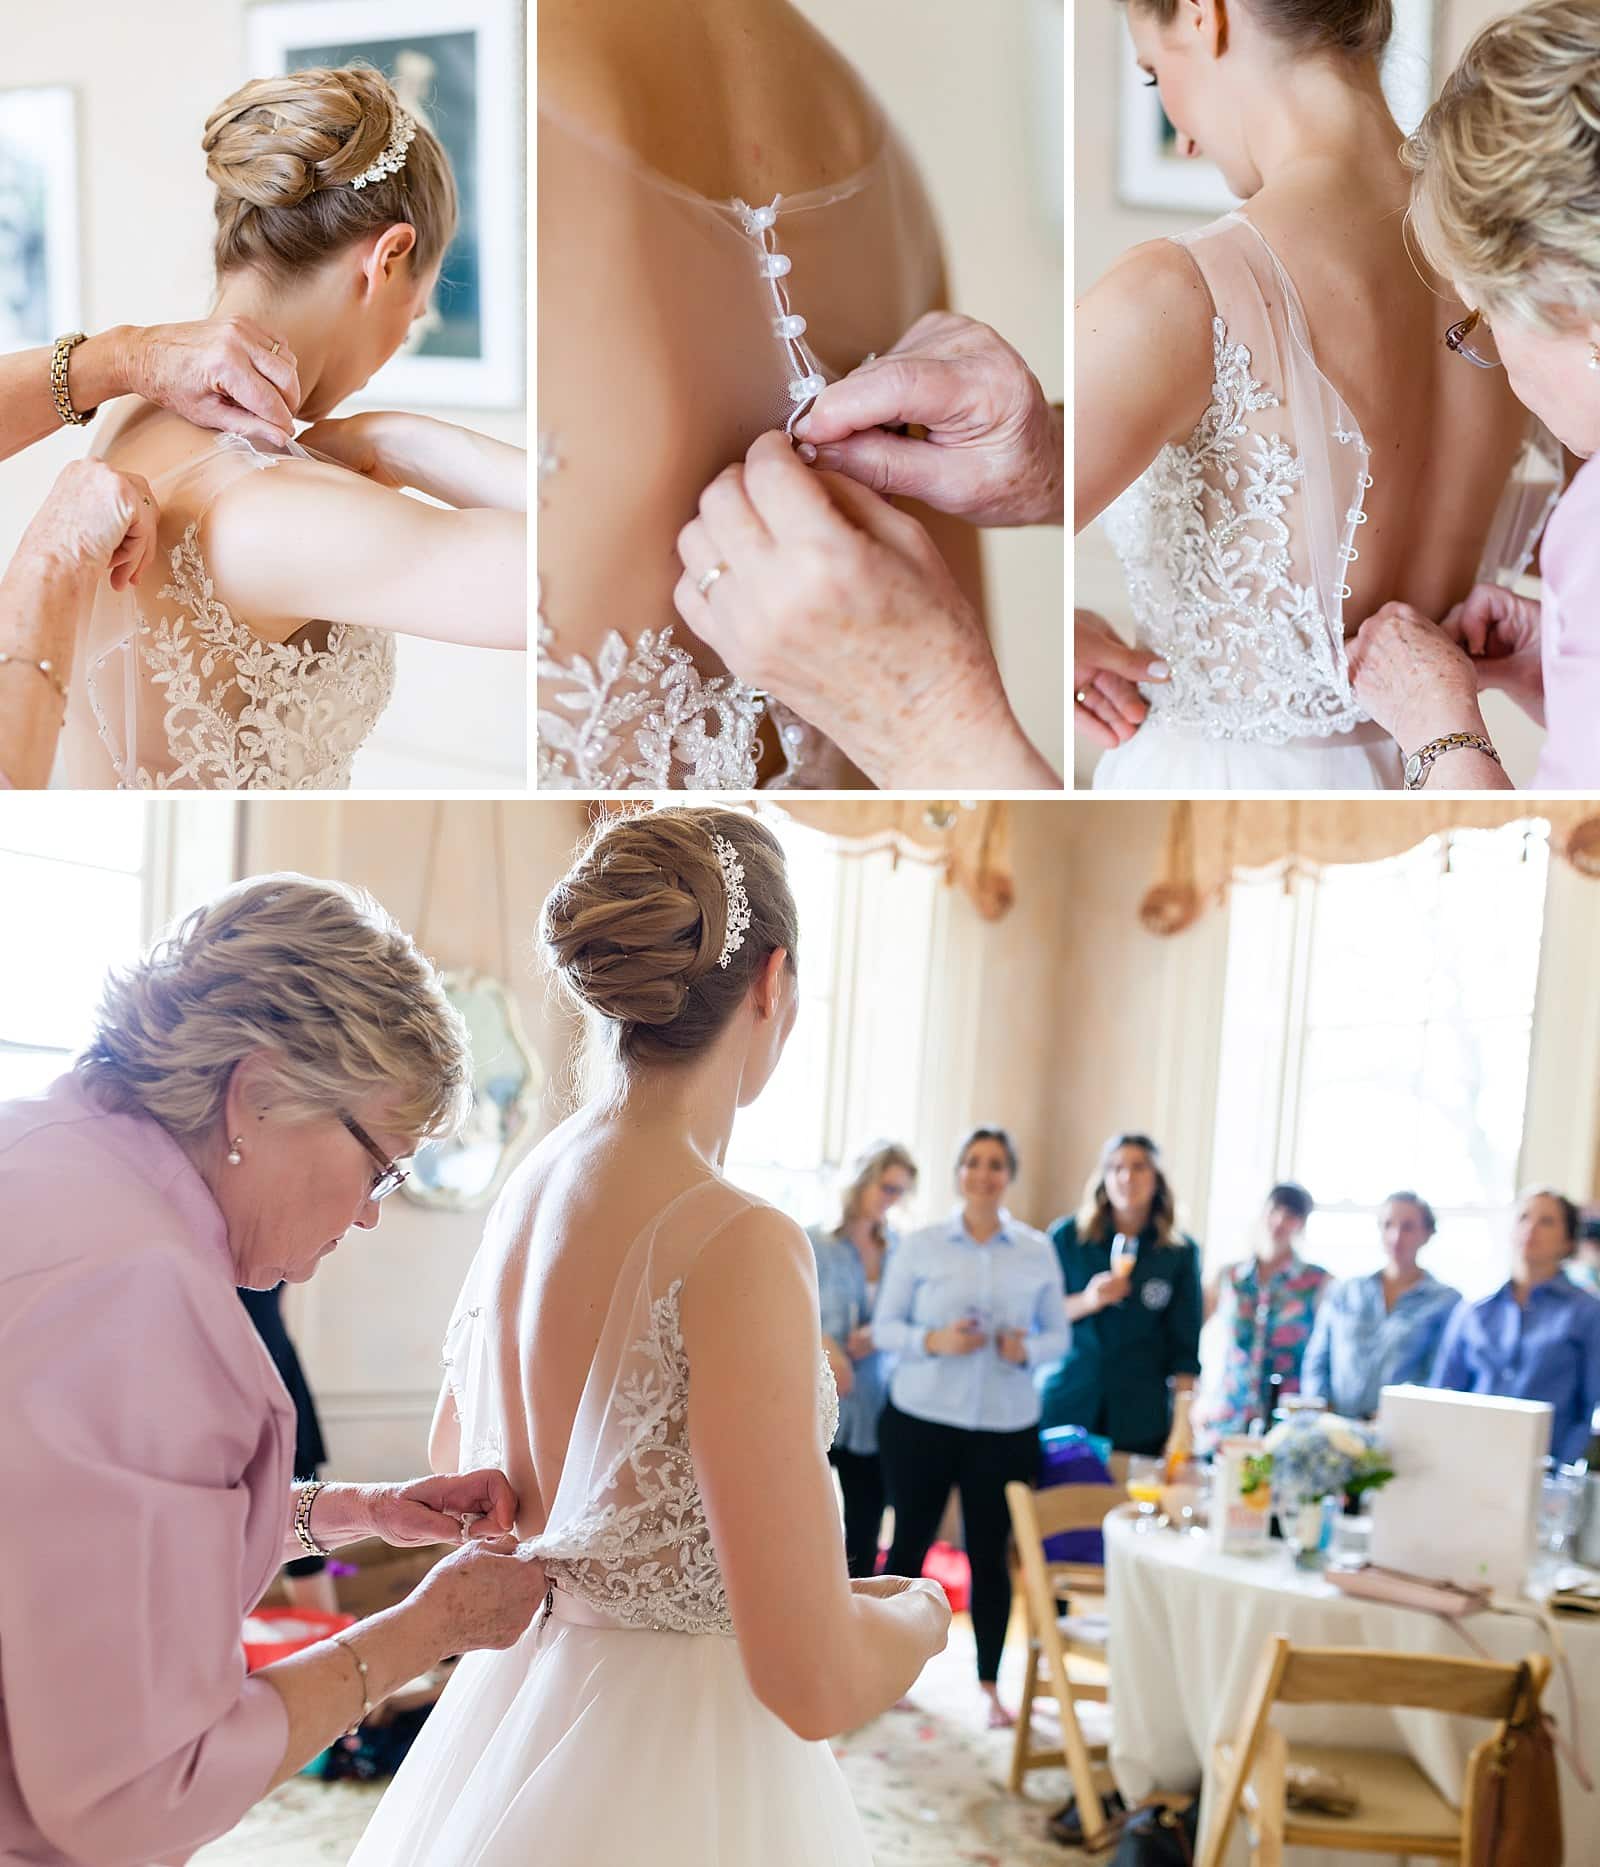 Mother of the bride helping bride into dress, buttoning wedding gown, lace wedding gown